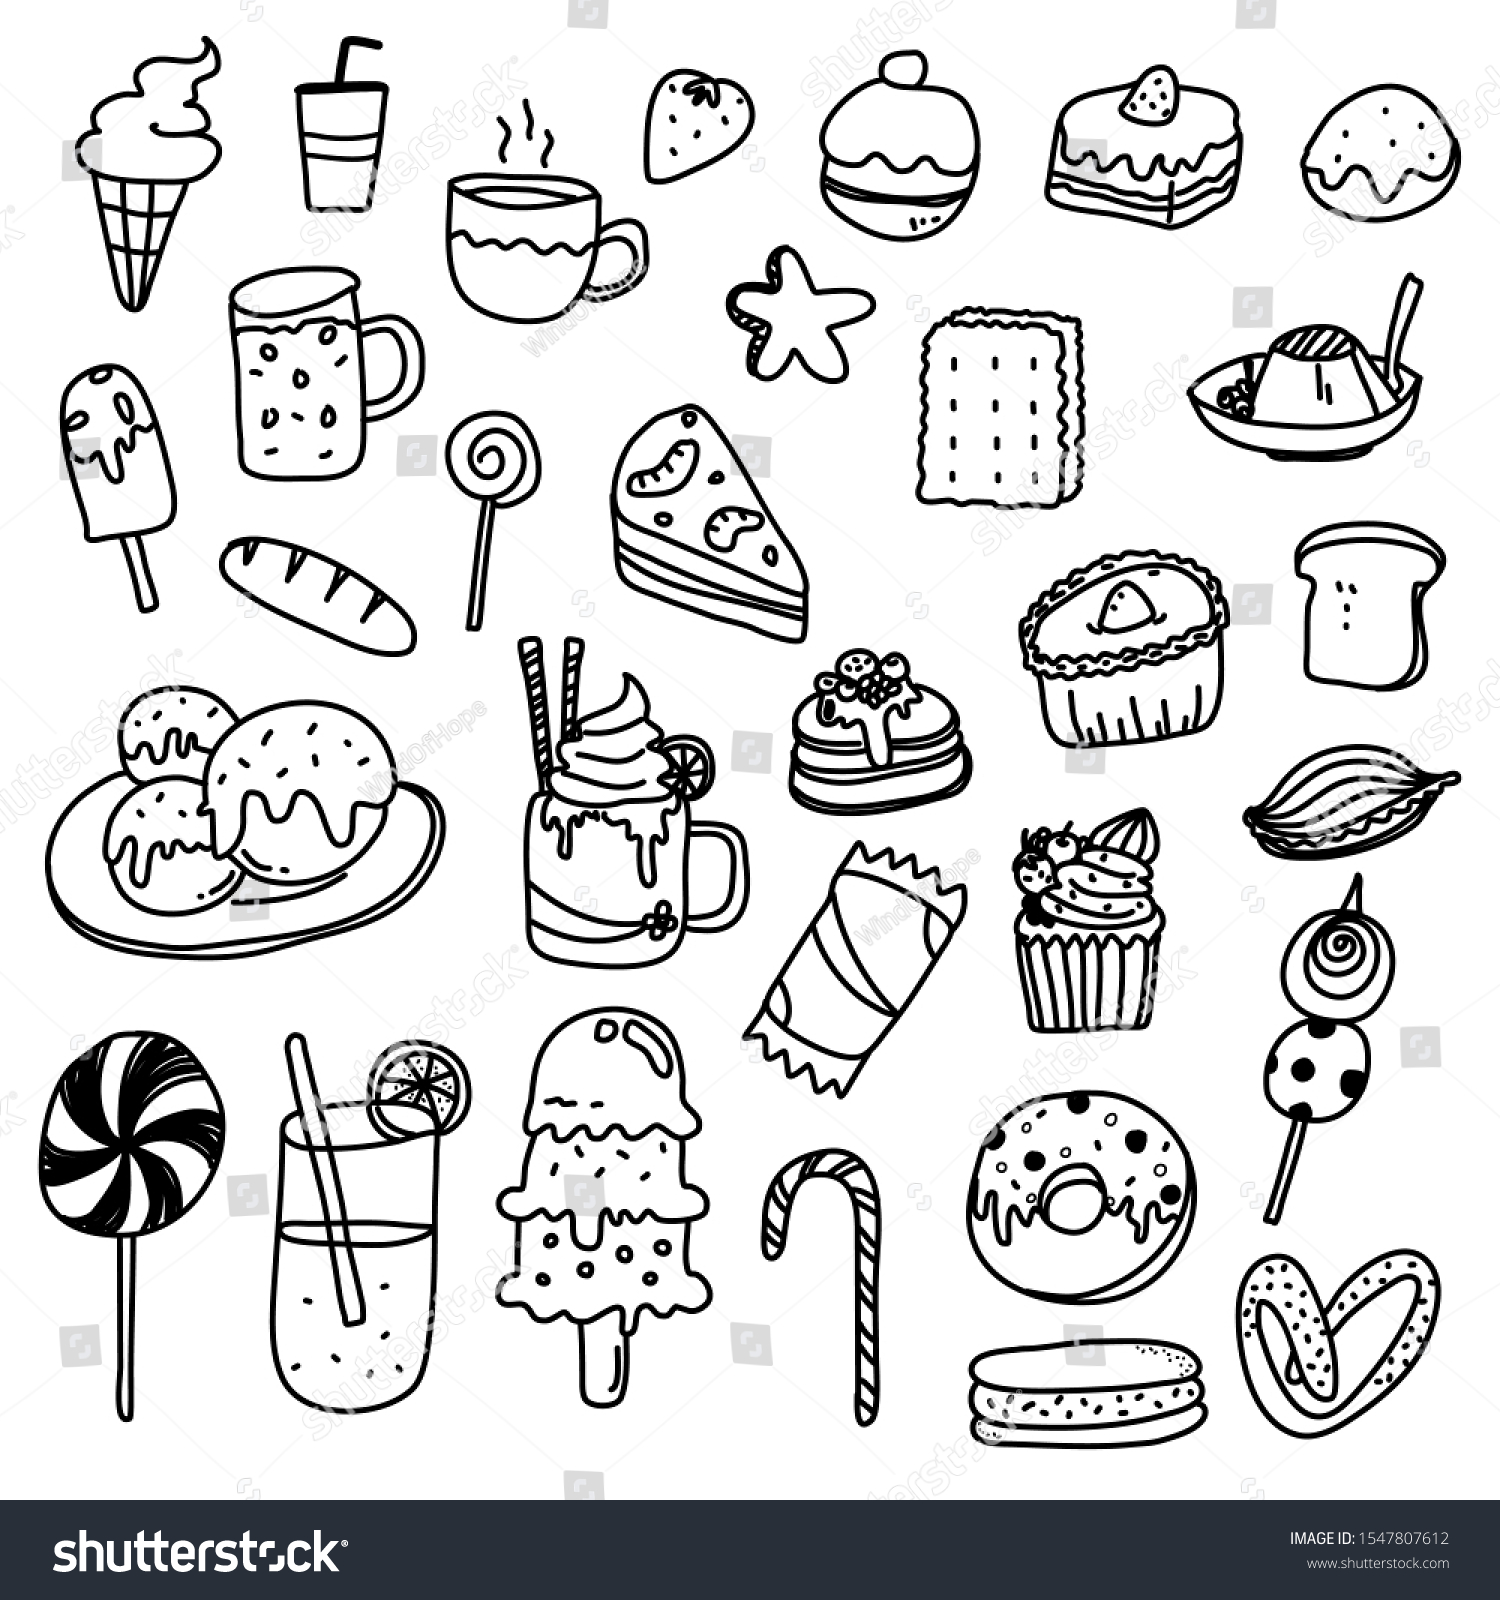 Doodle Food Drink Vector Freehand Drawing Stock Vector (Royalty Free ...